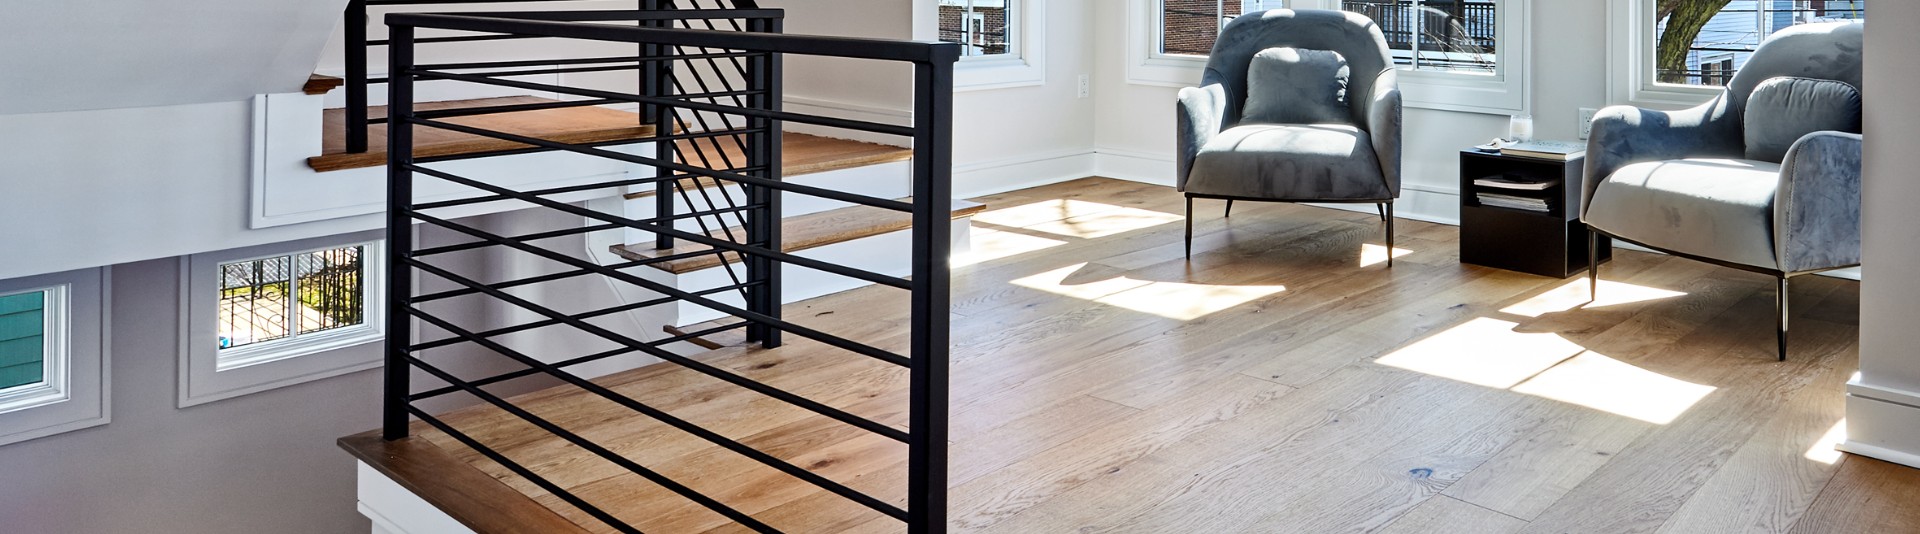 Our flooring is of superior quality.